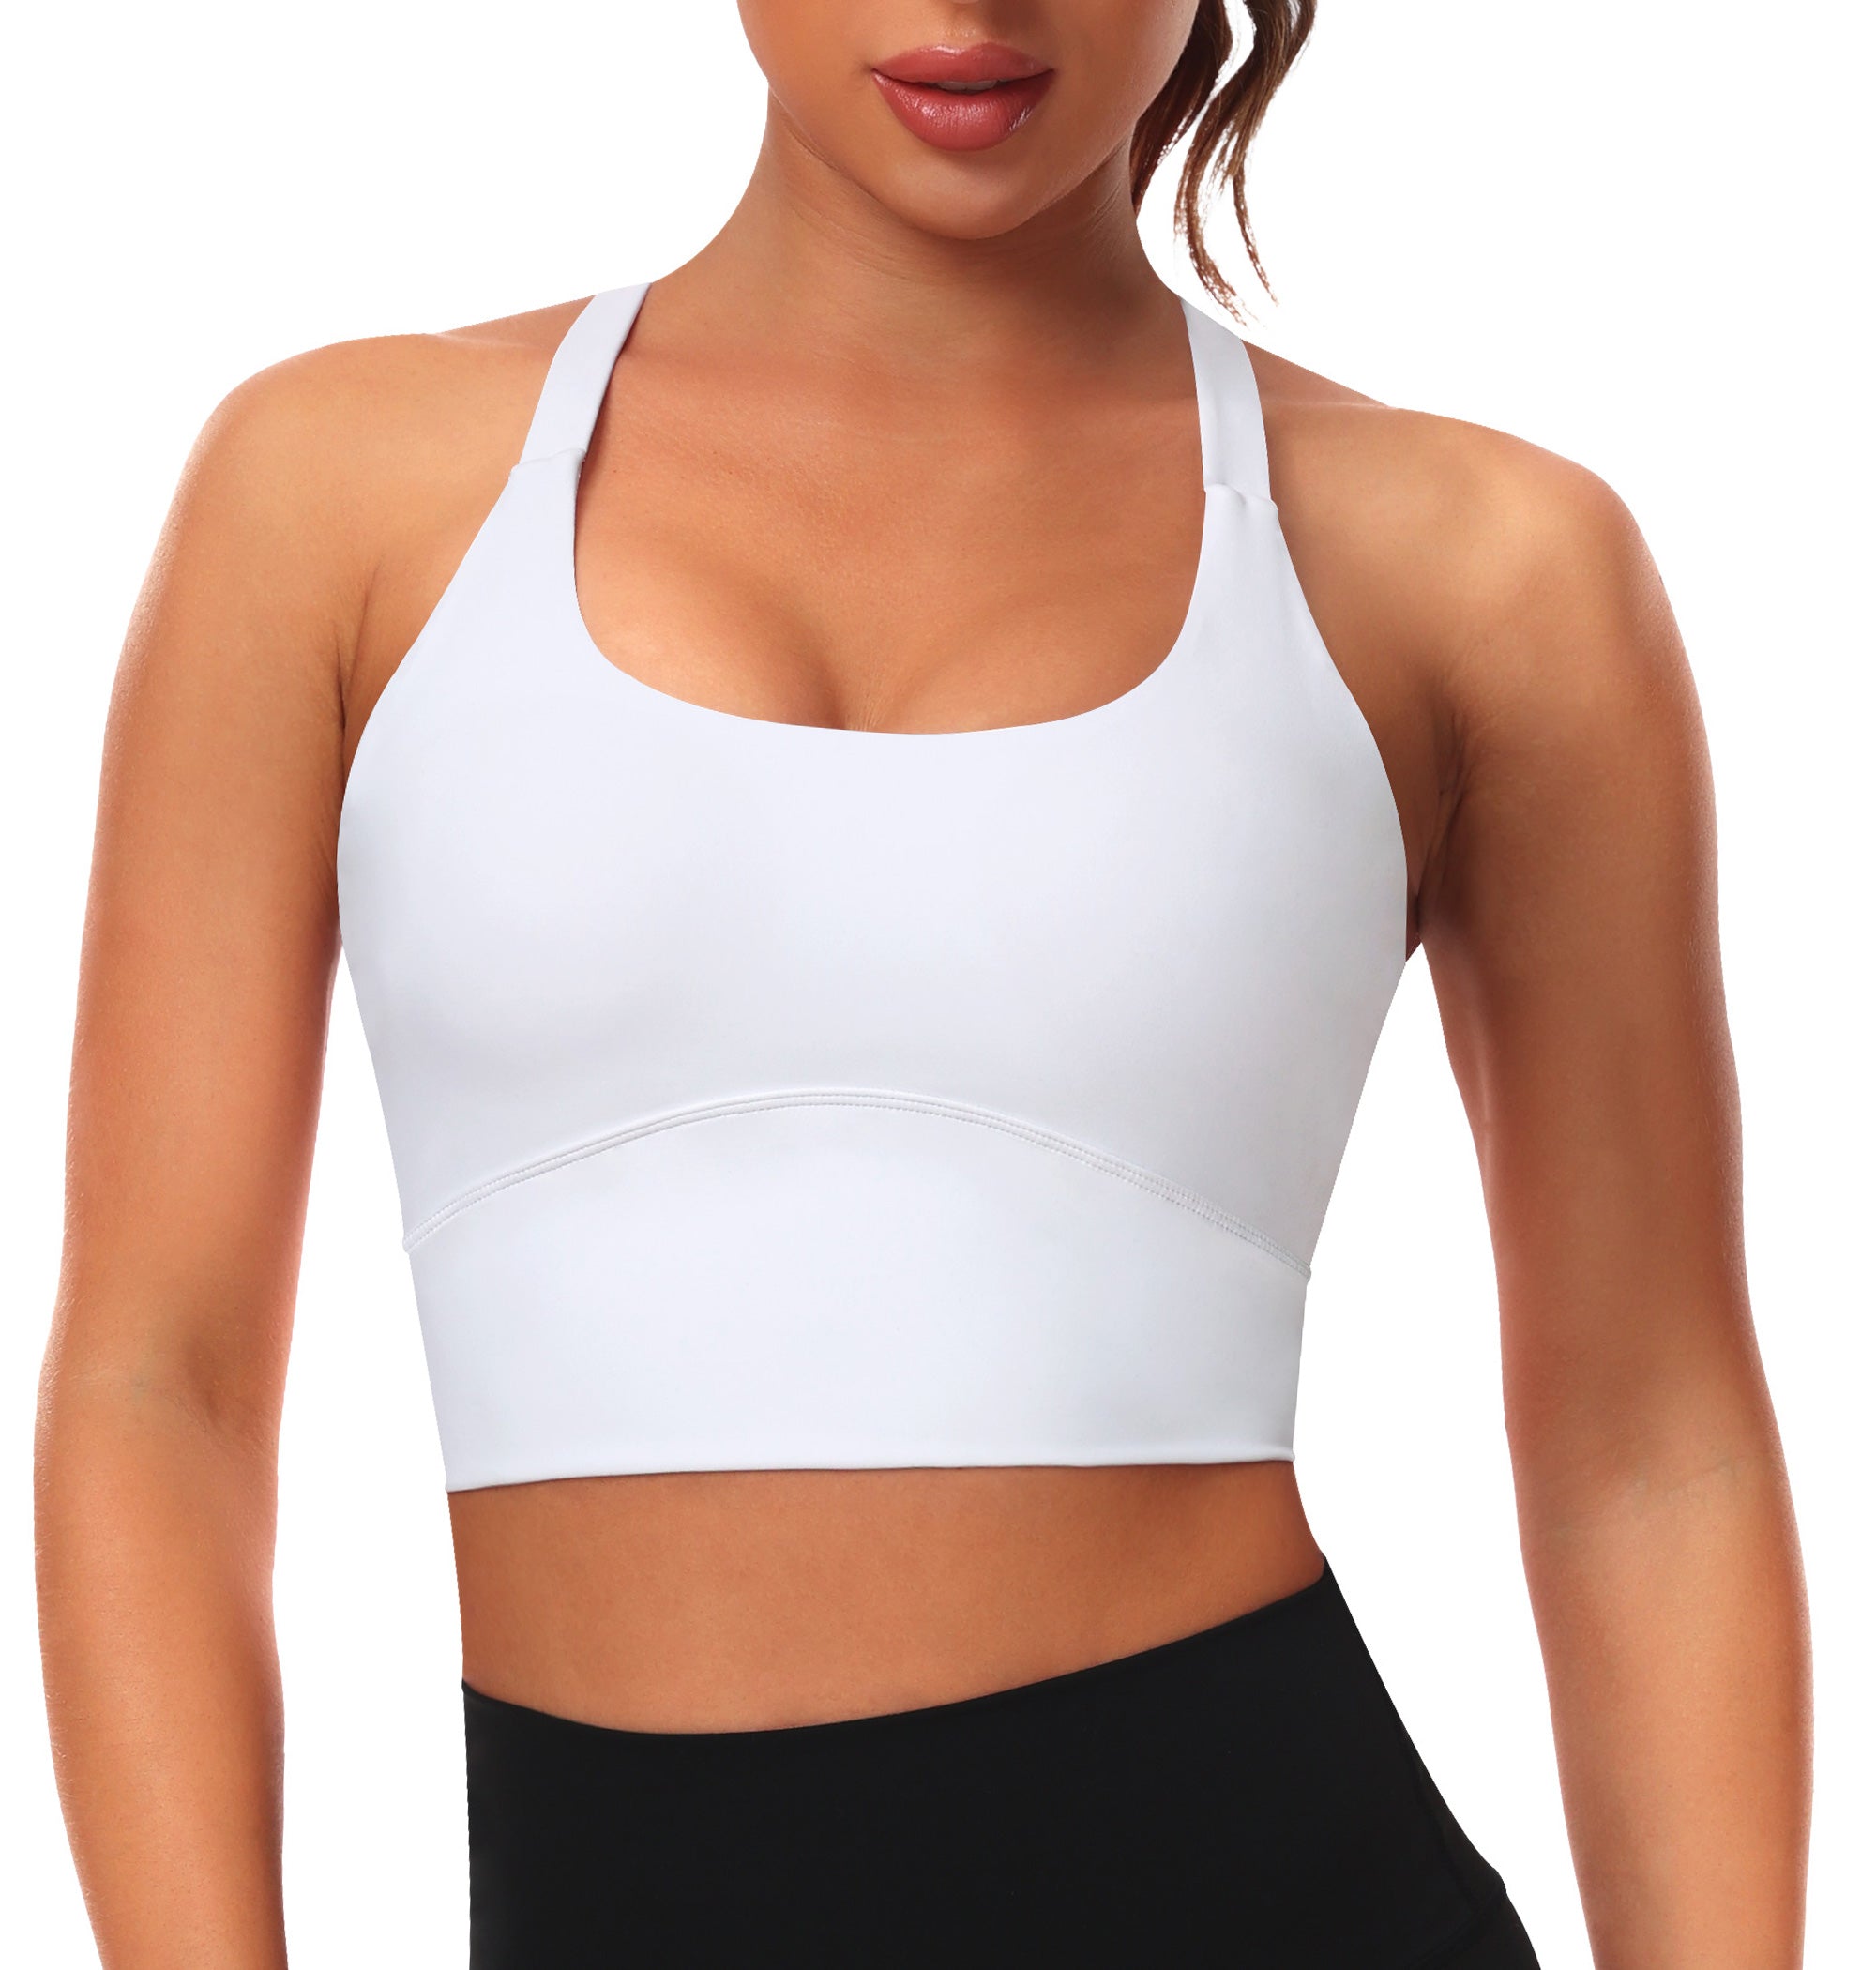 GOFIEP High Impact Sports Bras for Women wide shoulder straps and a hook and eye back strap design Workout Bra Bounce Control